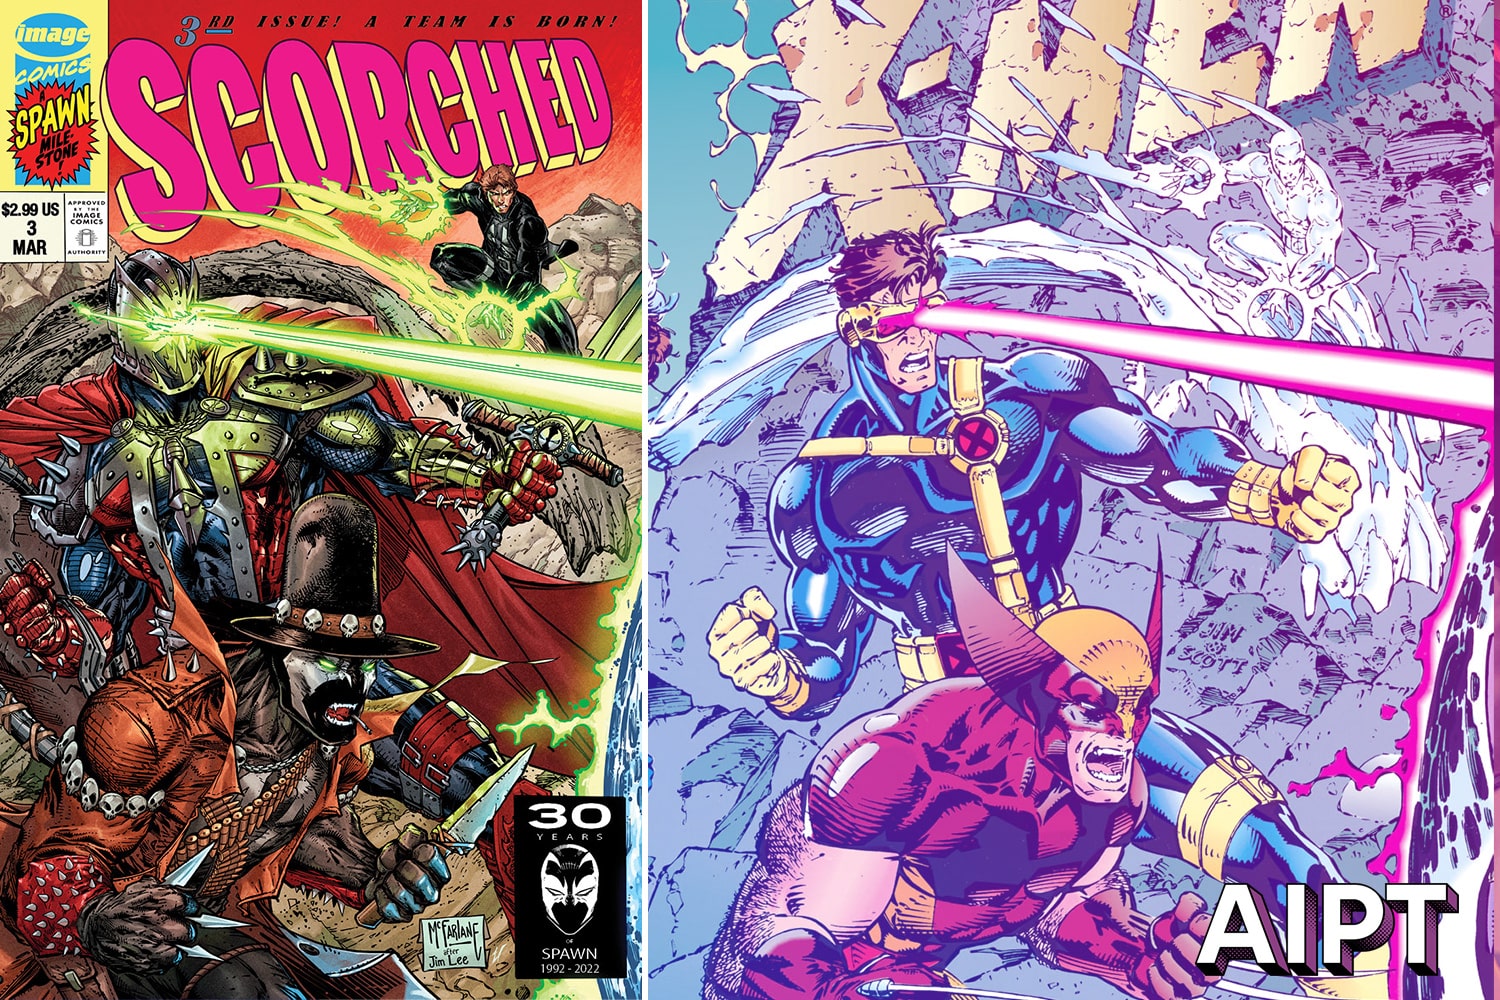 Todd McFarlane homages Jim Lee 'X-Men' #1 for 'The Scorched' #3